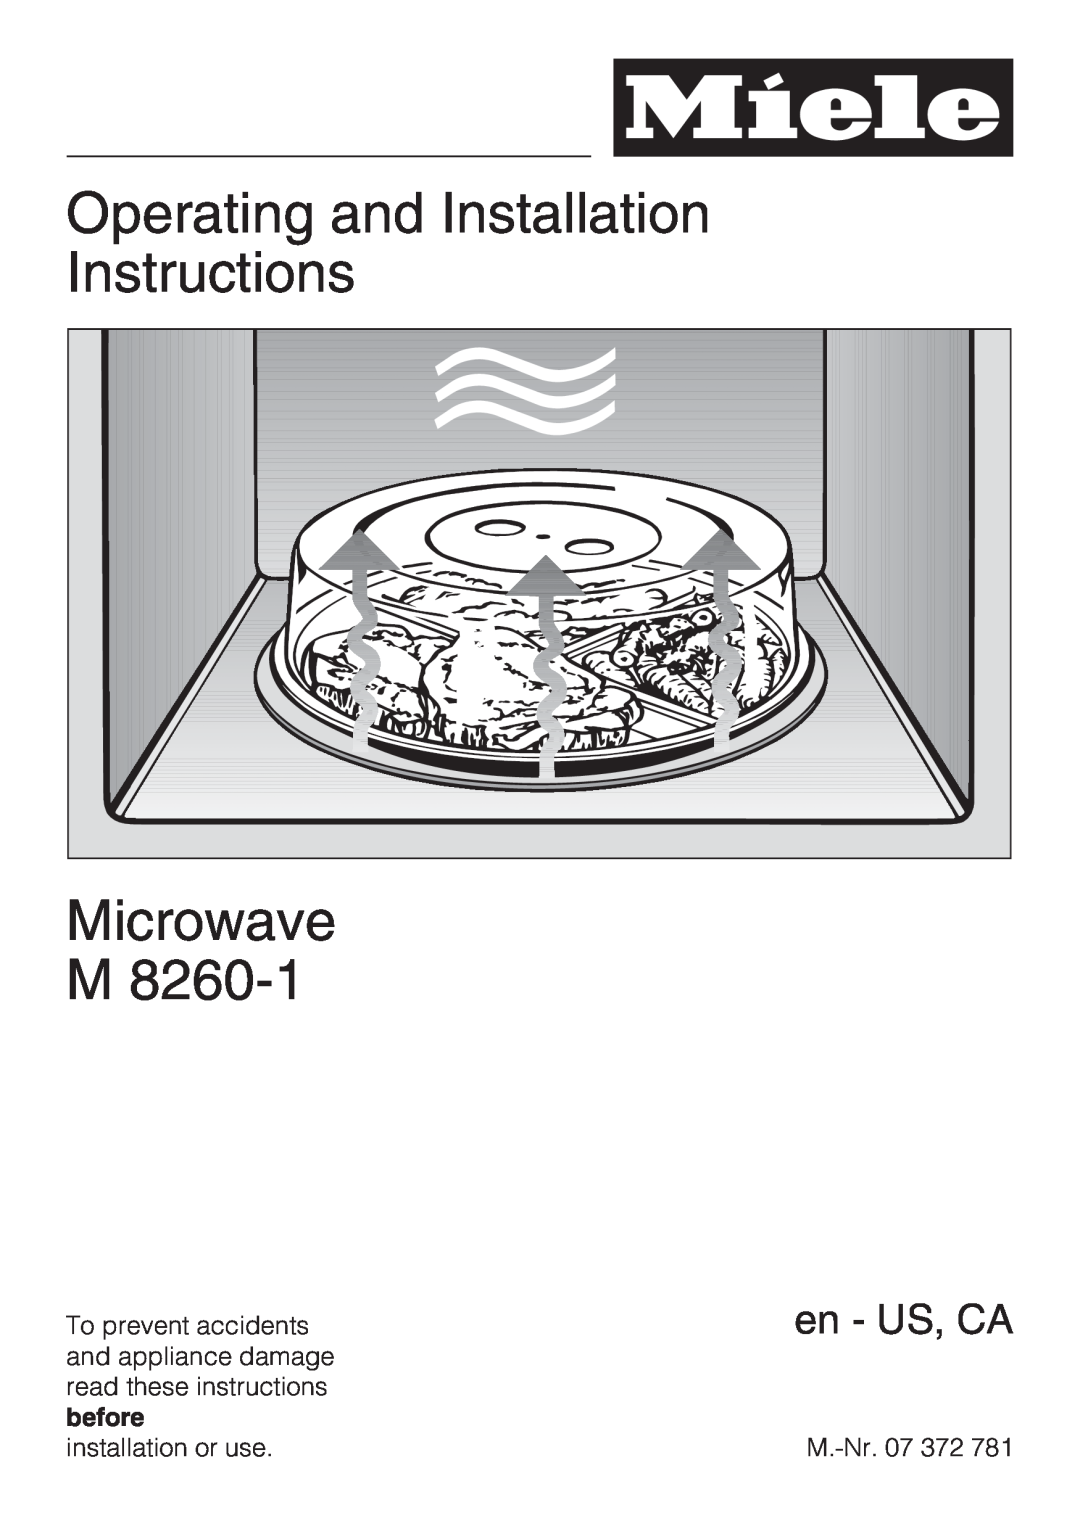 Miele M8260-1 installation instructions Operating and Installation Instructions, Microwave, en - US, CA 